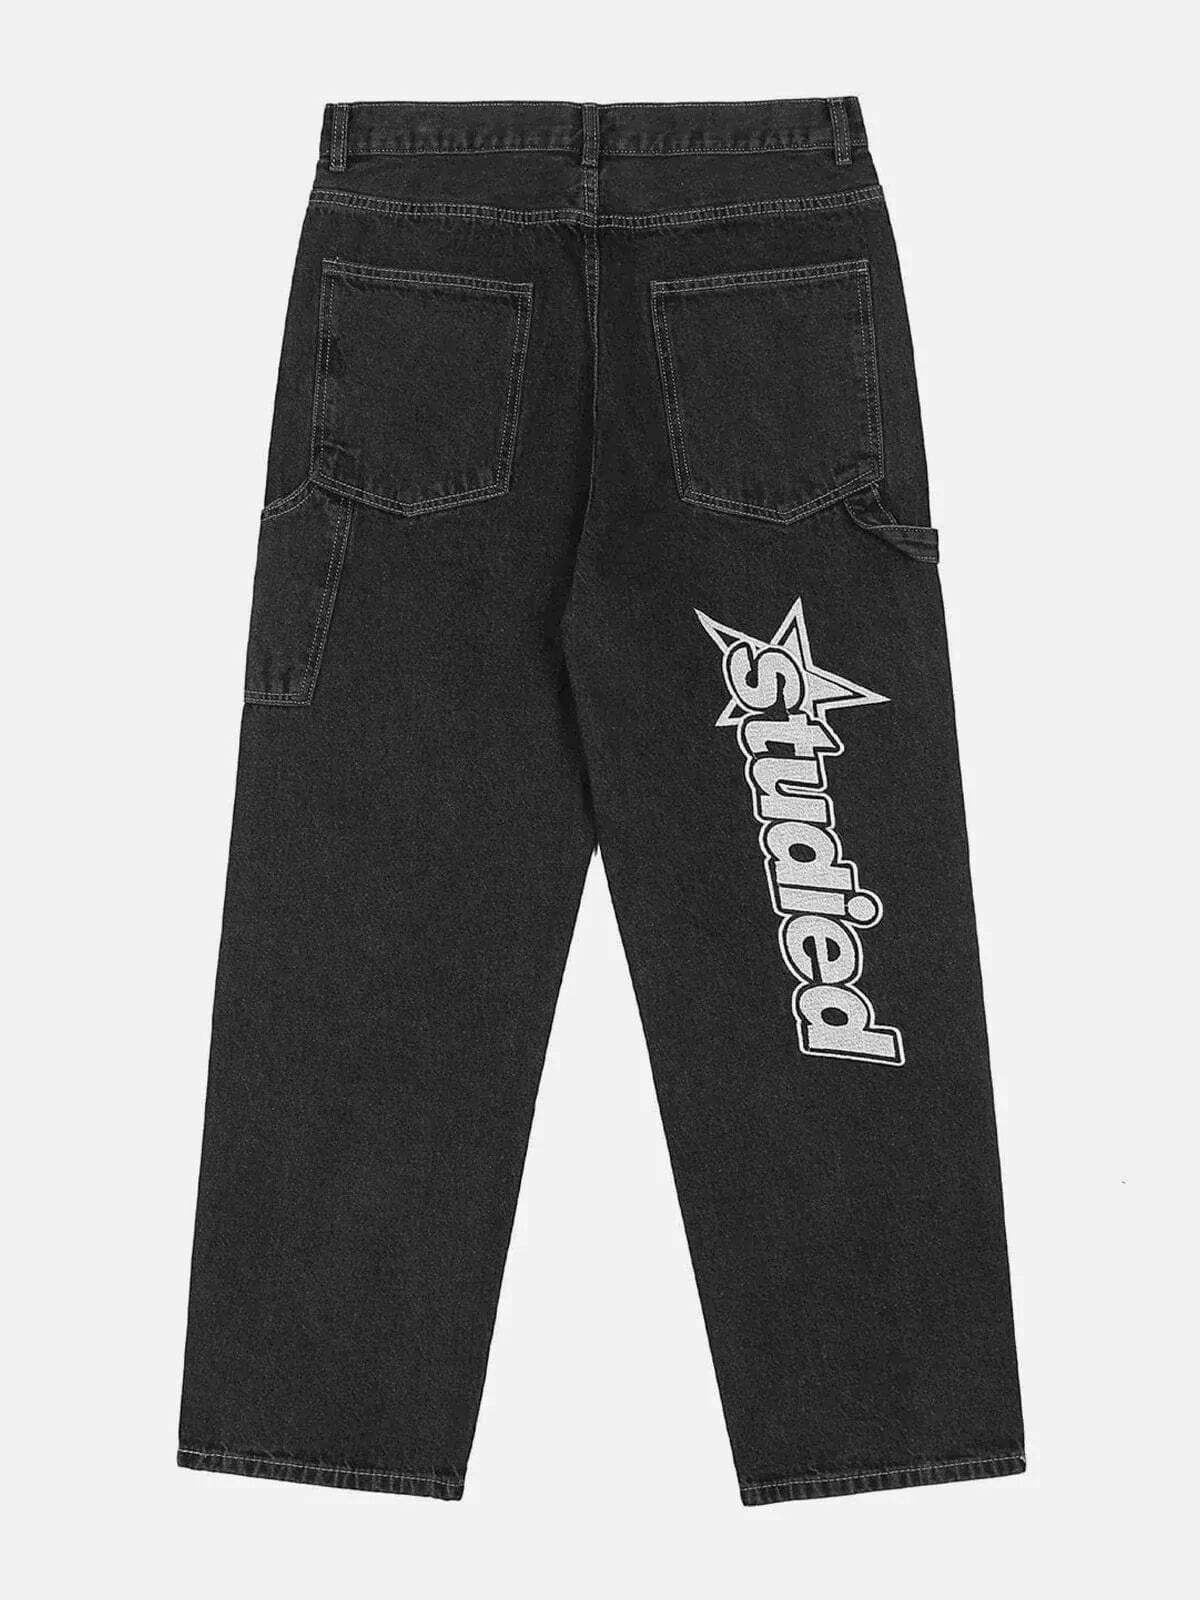 star embroidered jeans edgy & retro streetwear 4342